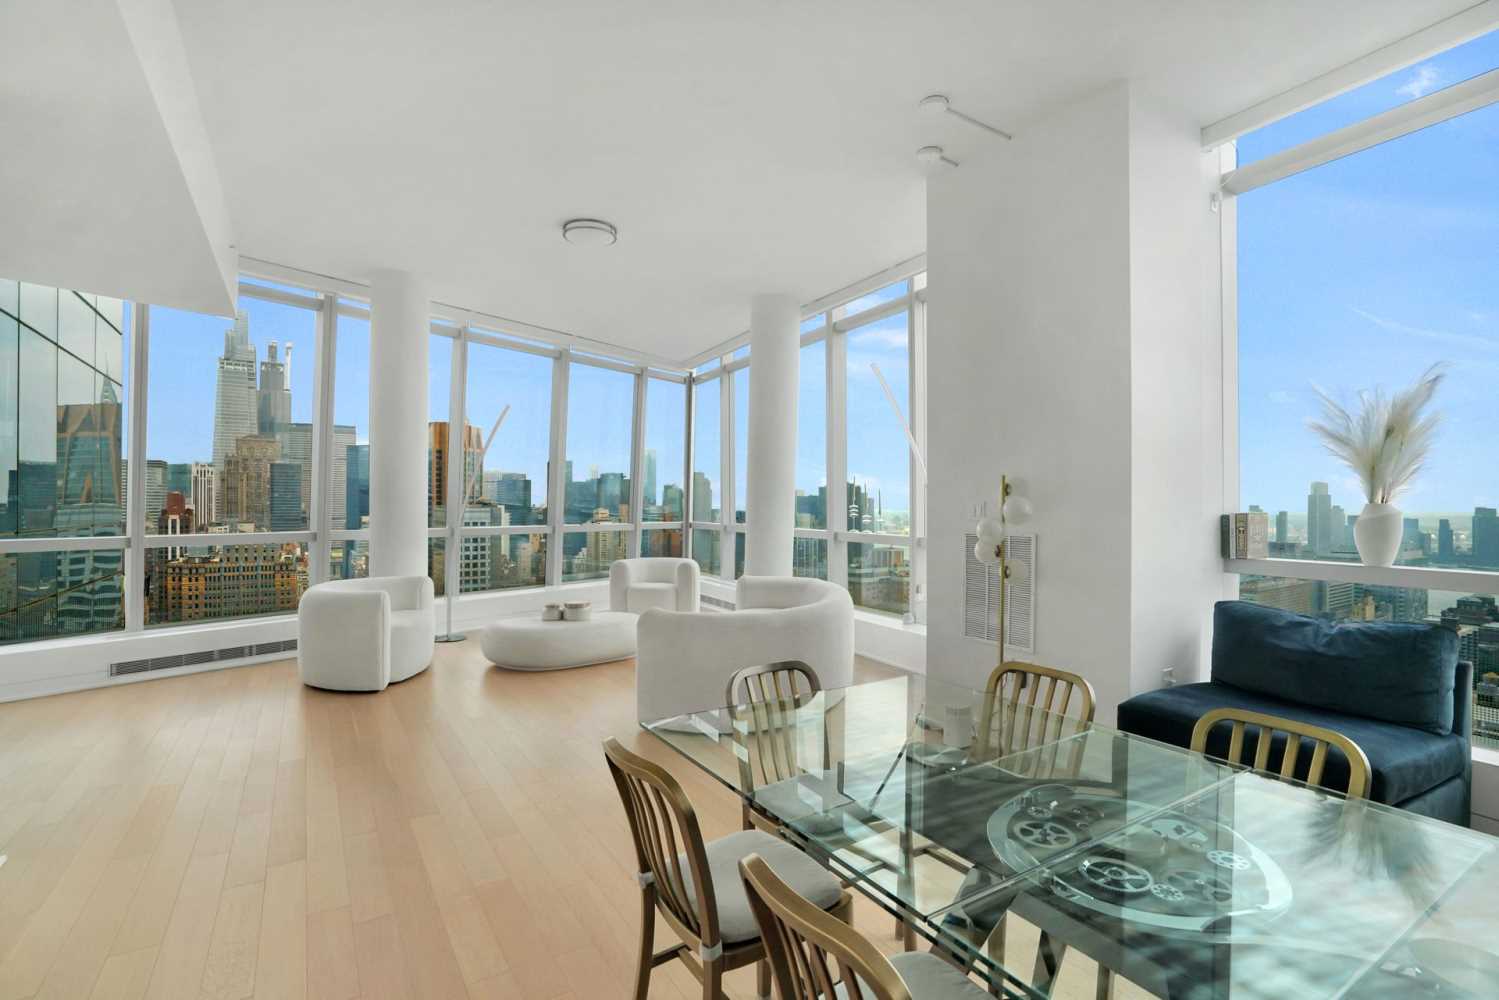 400 Park Avenue Ph1, Nomad, Downtown, NYC - 5 Bedrooms  
5.5 Bathrooms  
14 Rooms - 